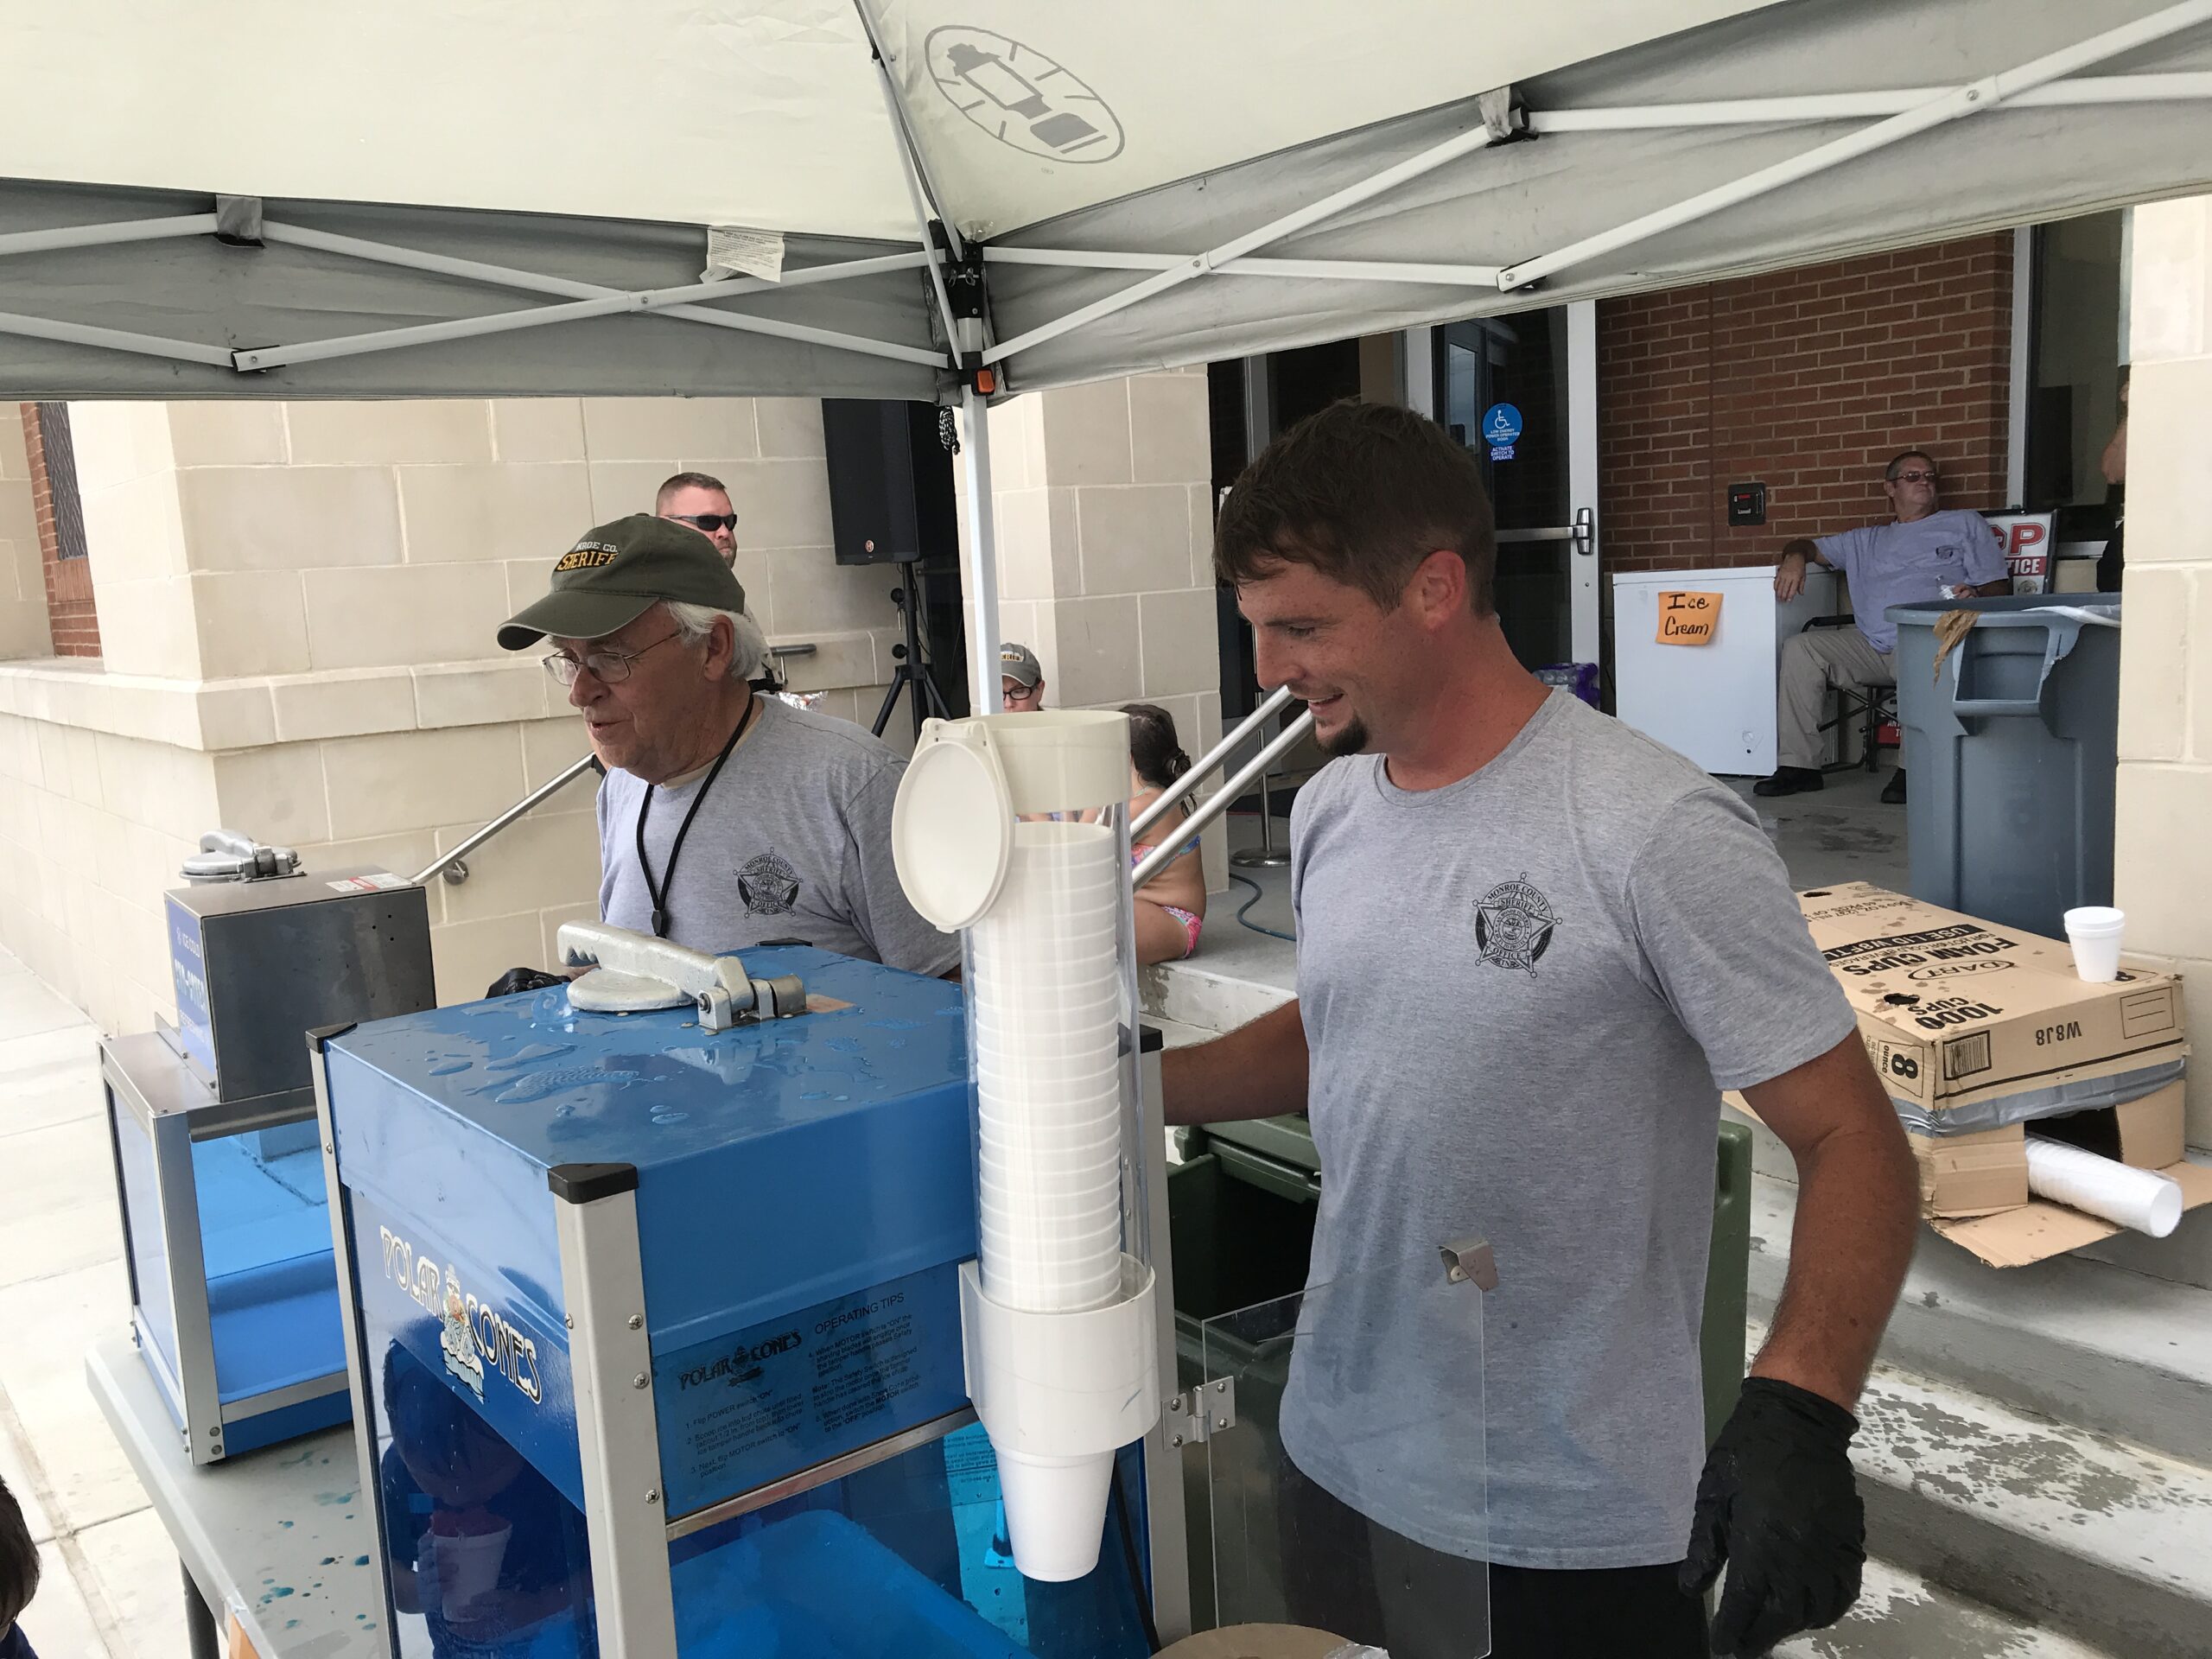 Steve Ogle and Jim Wall serve Snow Cones